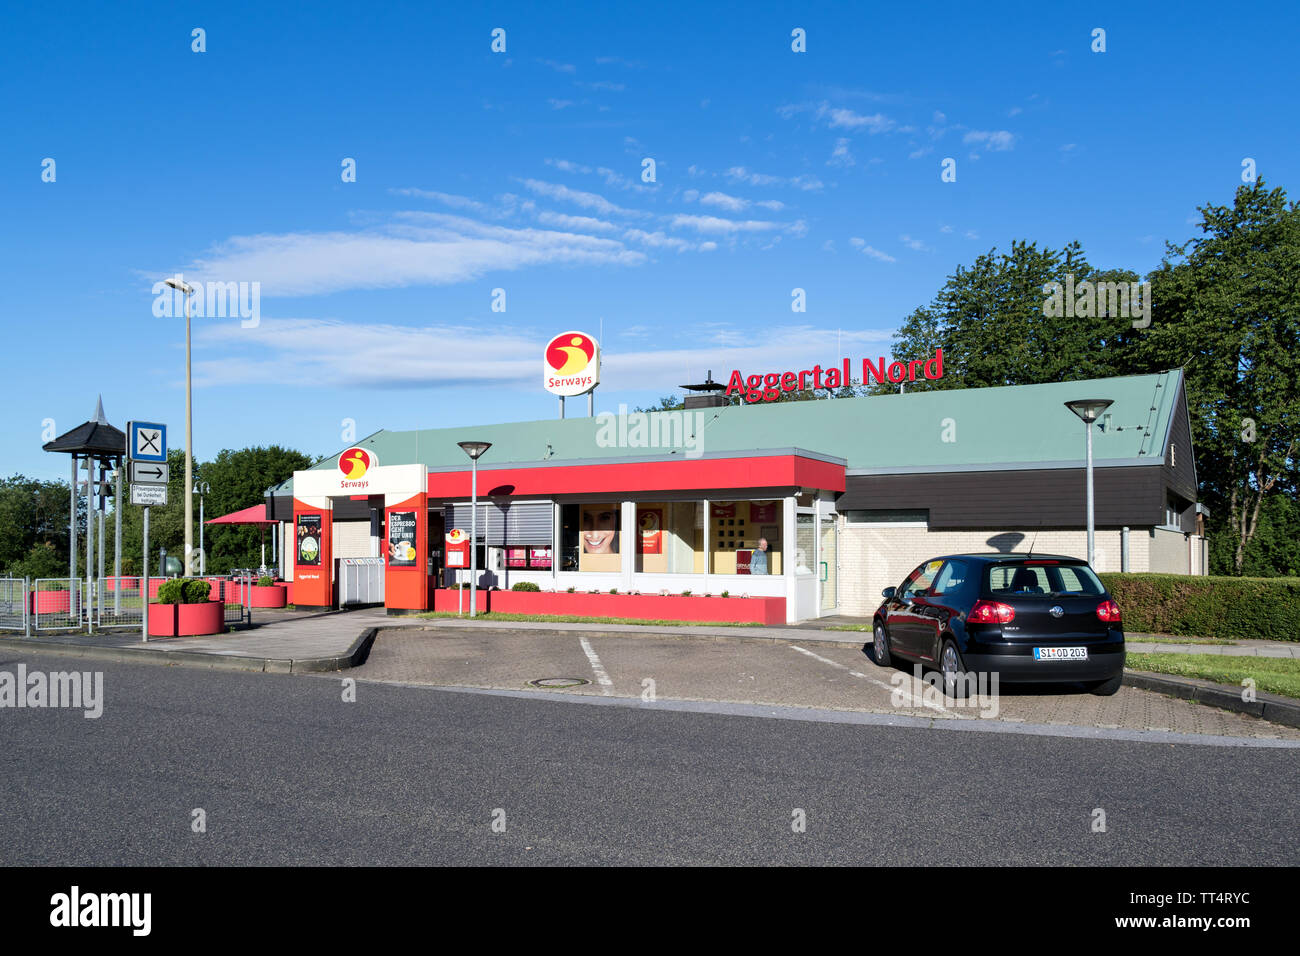 Serways restaurant Aggertal Nord. Serways is a brand of Tank & Rast, which leases, operates and manages motorway service stations in Germany. Stock Photo